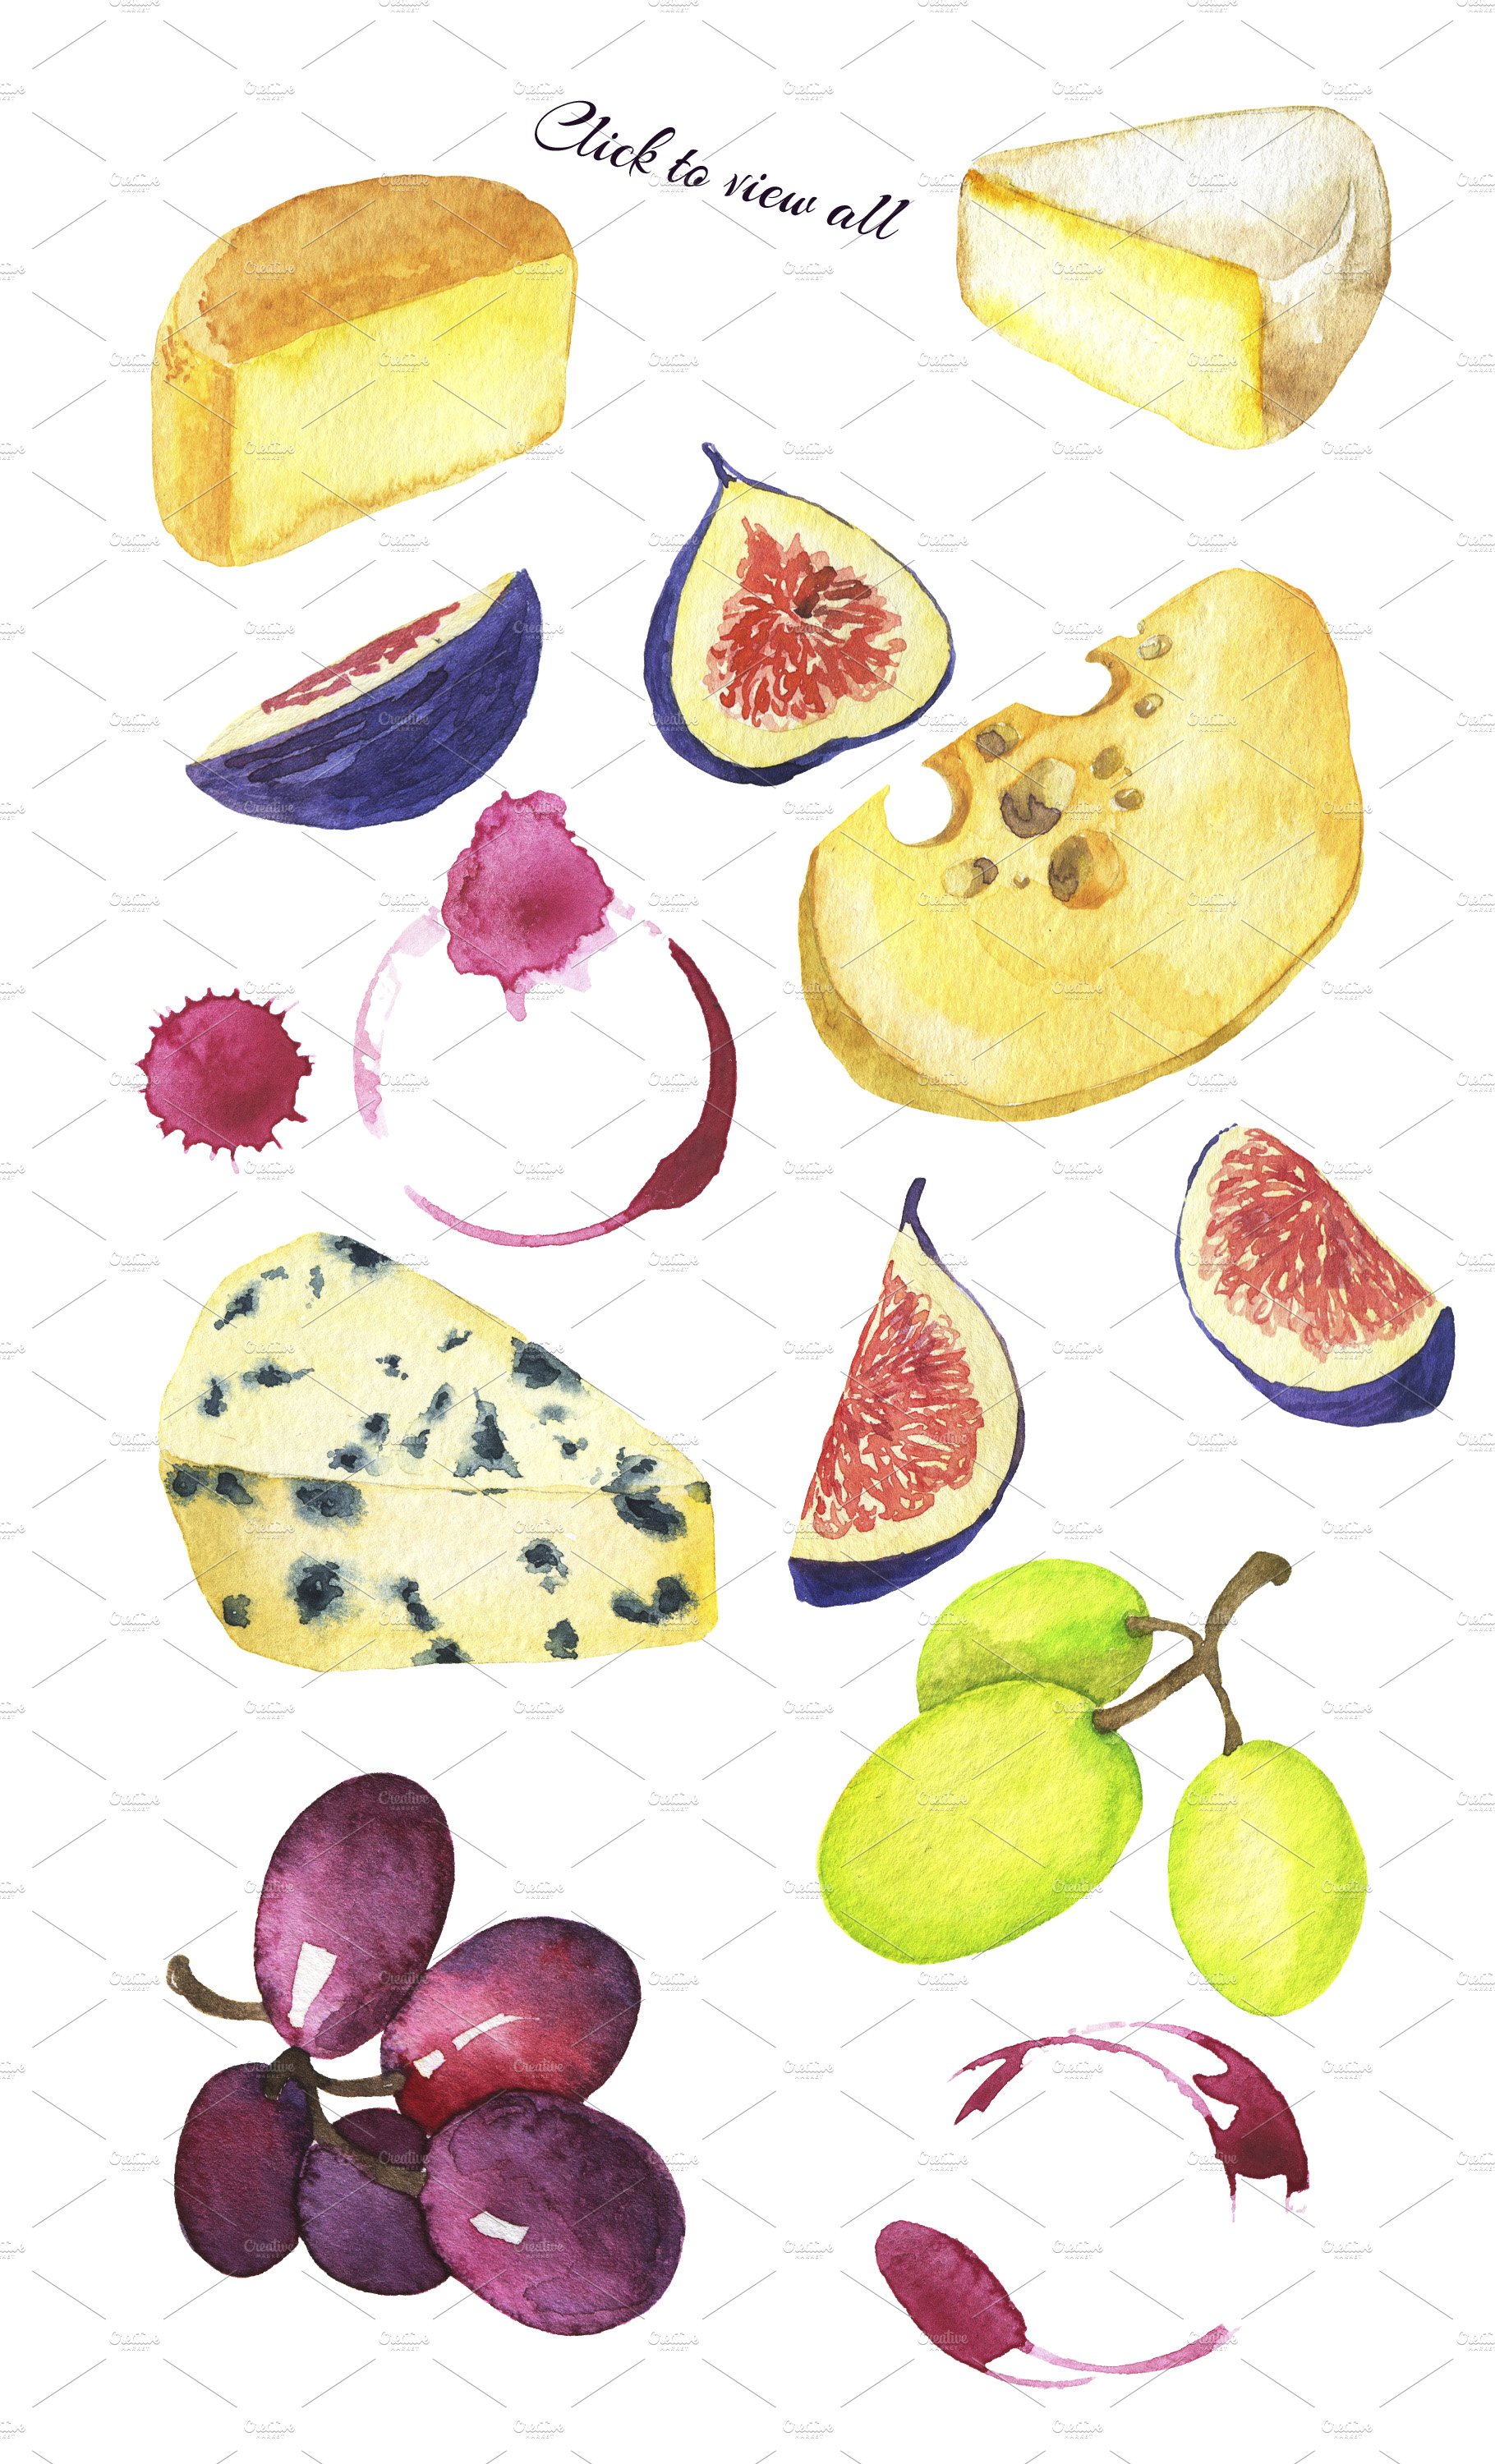 Cheese and wine watercolor preview image.